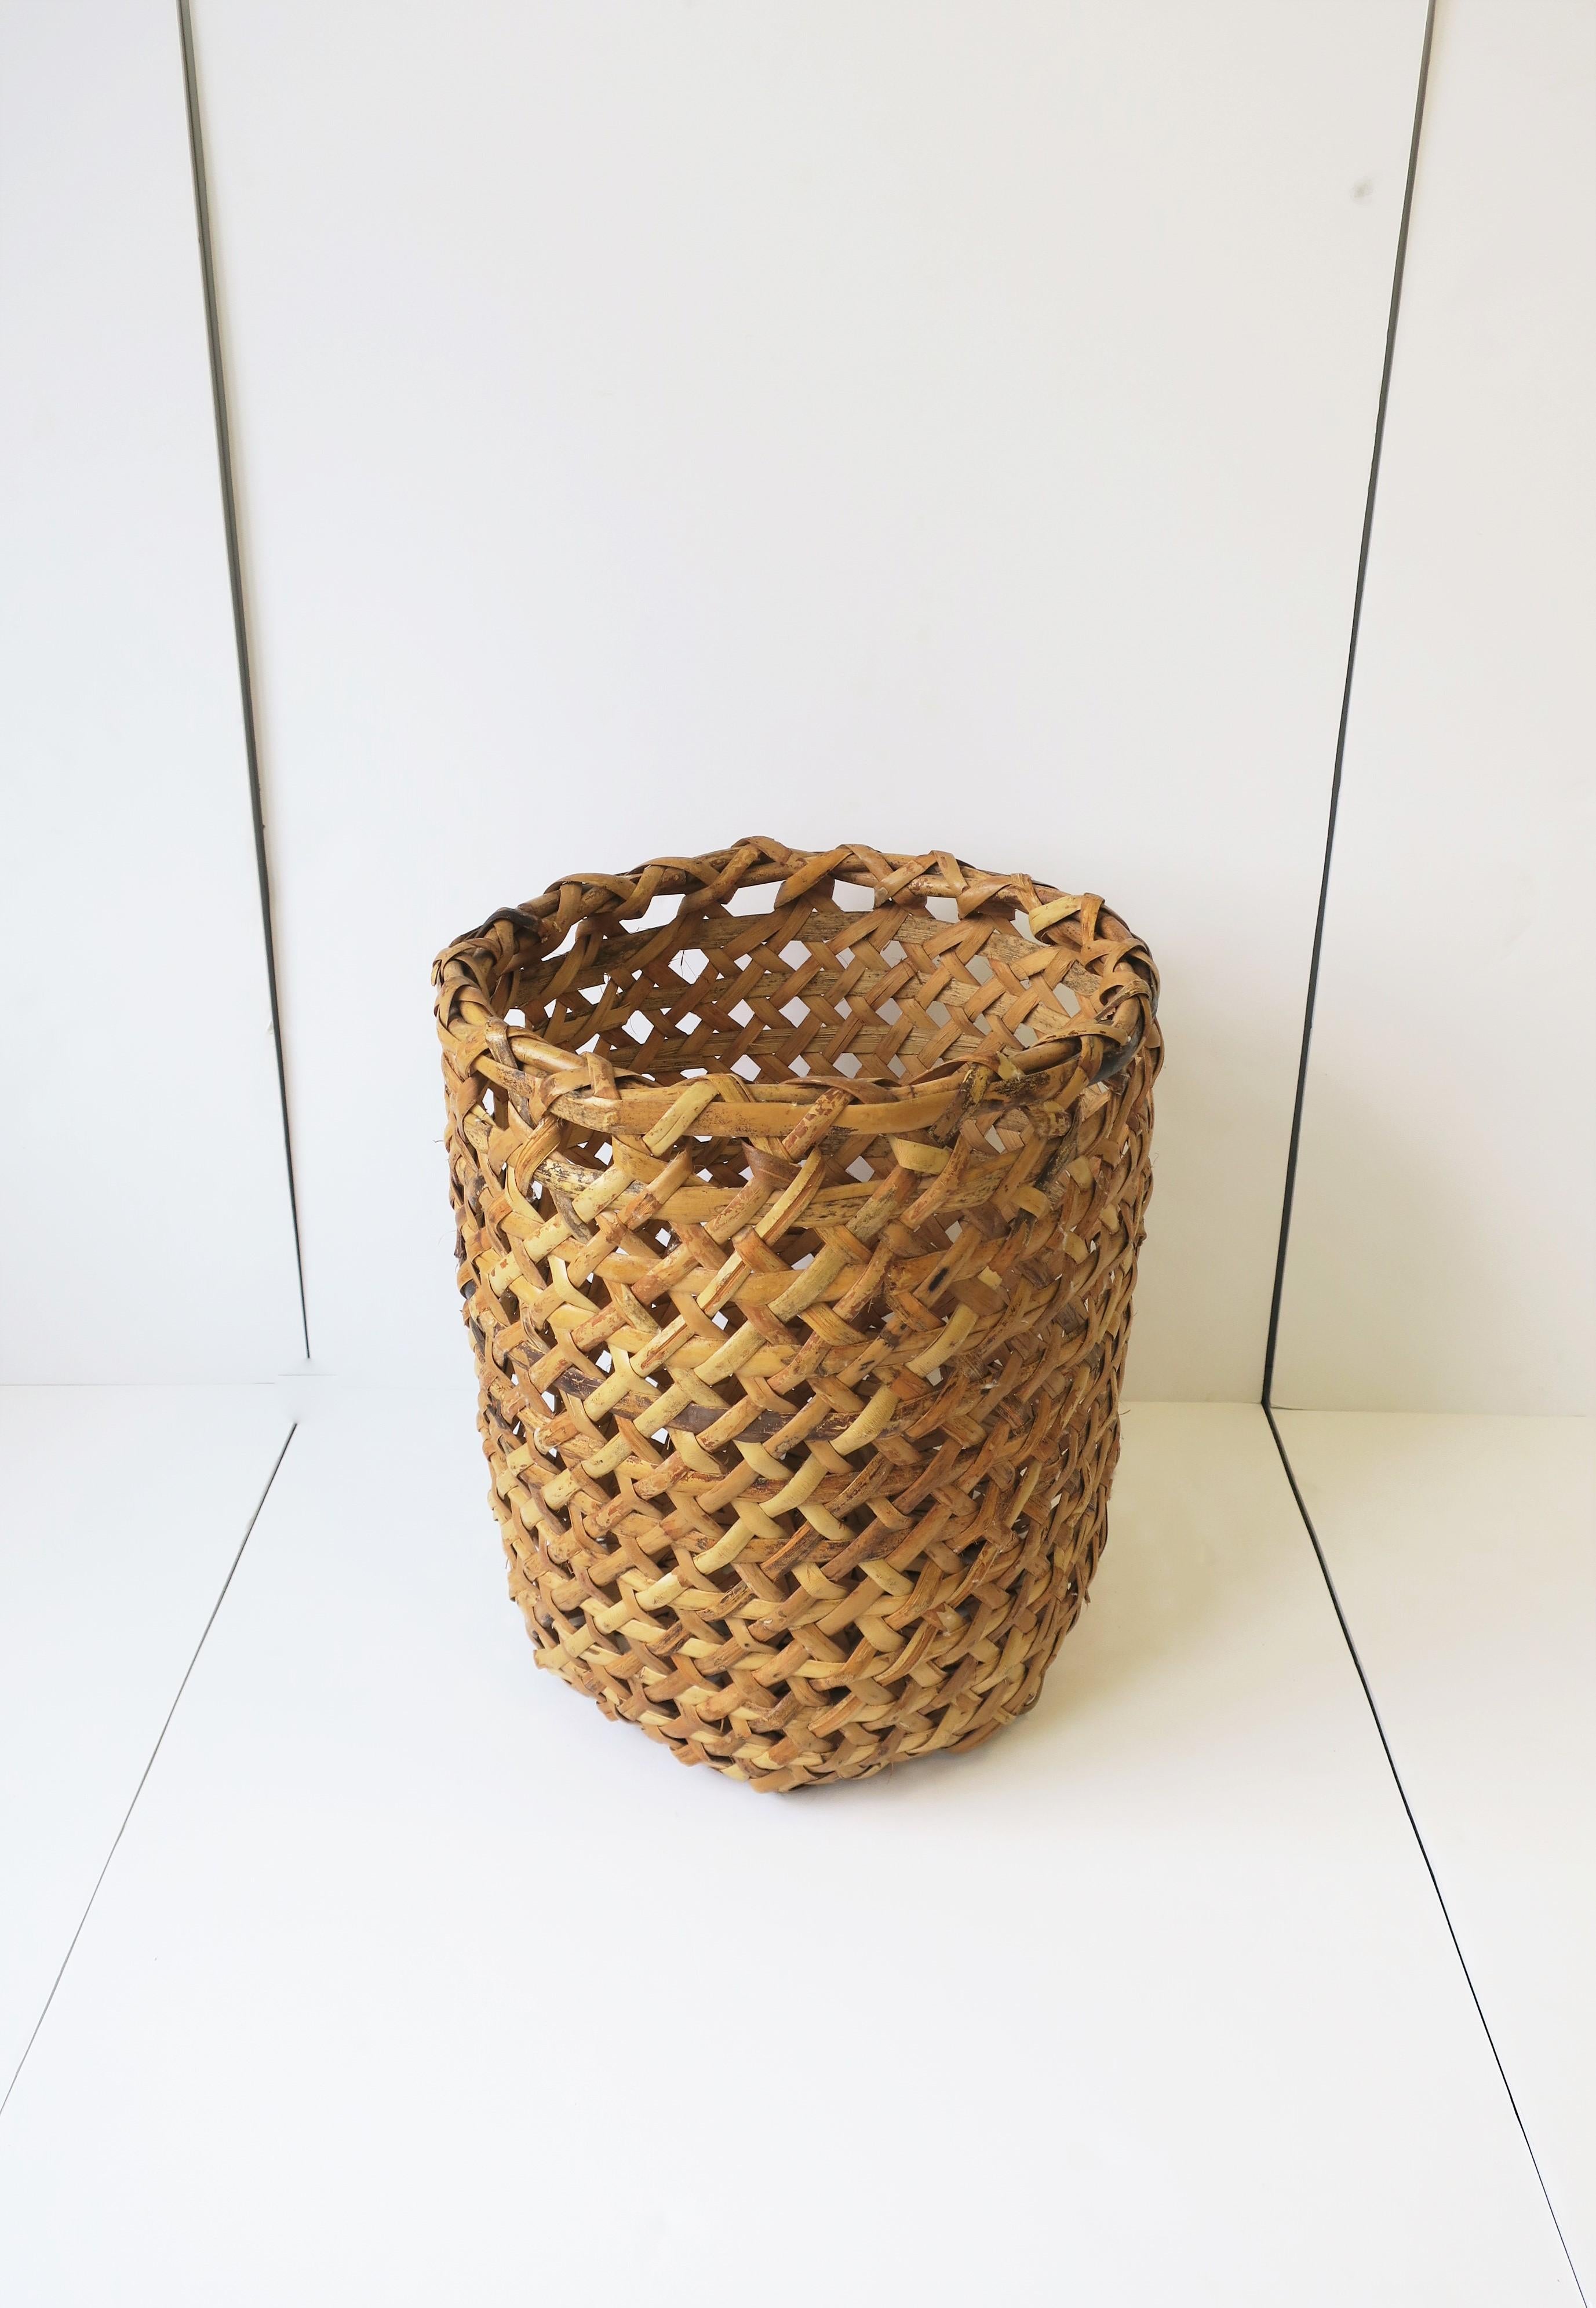 A beautiful and substantial hand-woven vintage wicker basket, circa mid-20th century. Basket could be decorative or used as a planter cachepot (plant pot holder), laundry basket hamper, a storage piece holding clean rolled towels for a shower, bath,